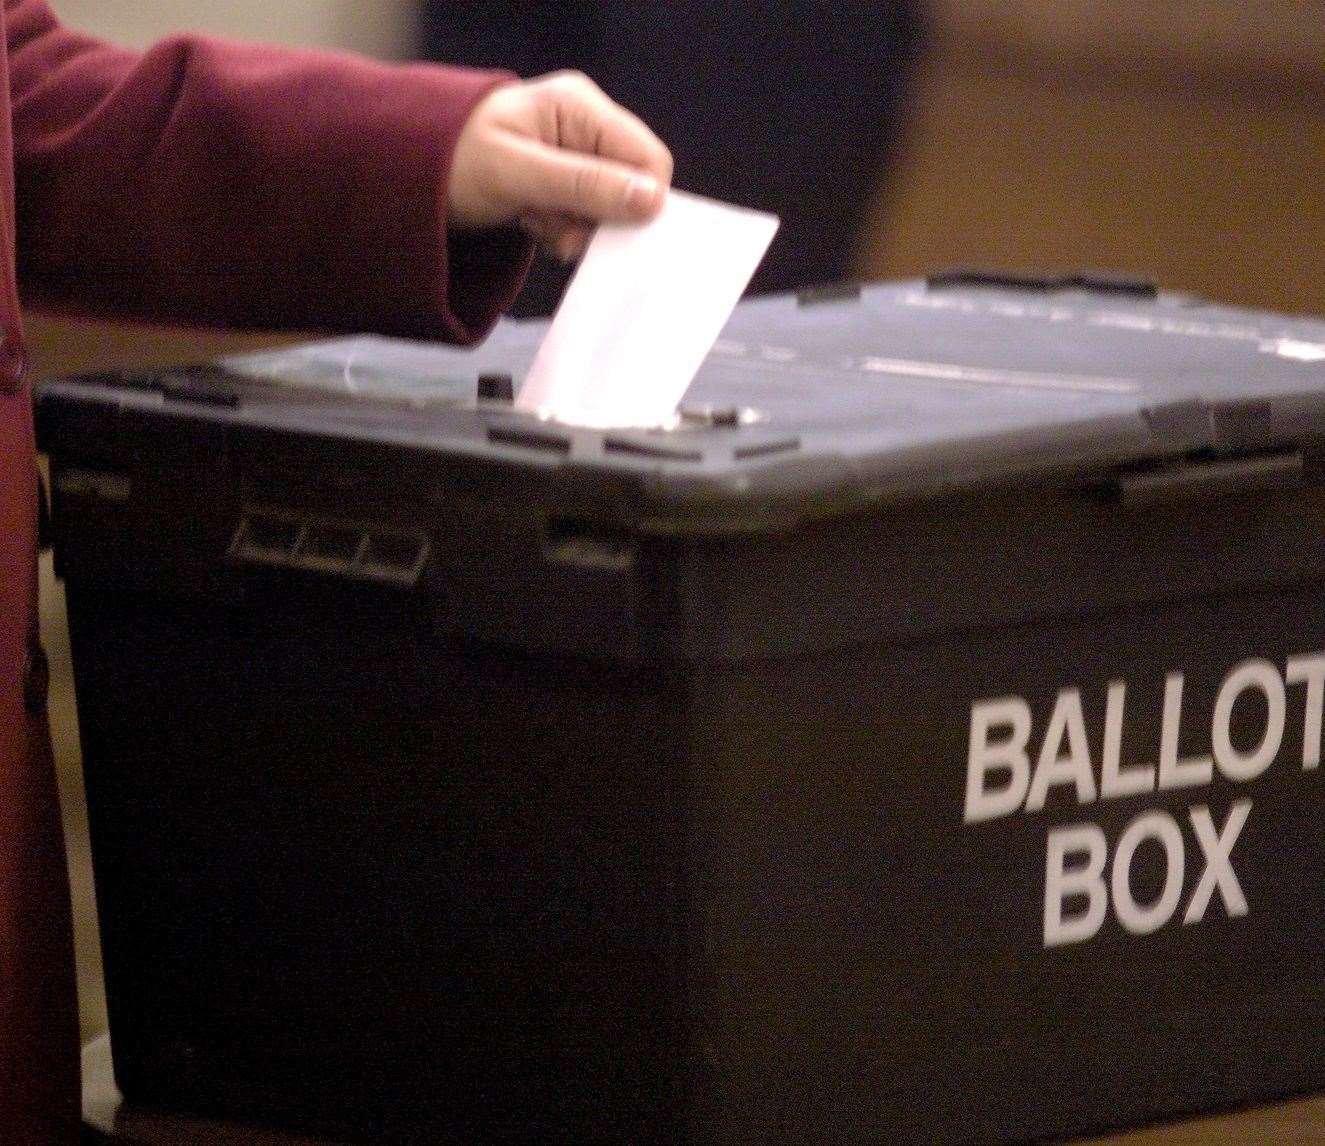 Parish and town council elections take place in May